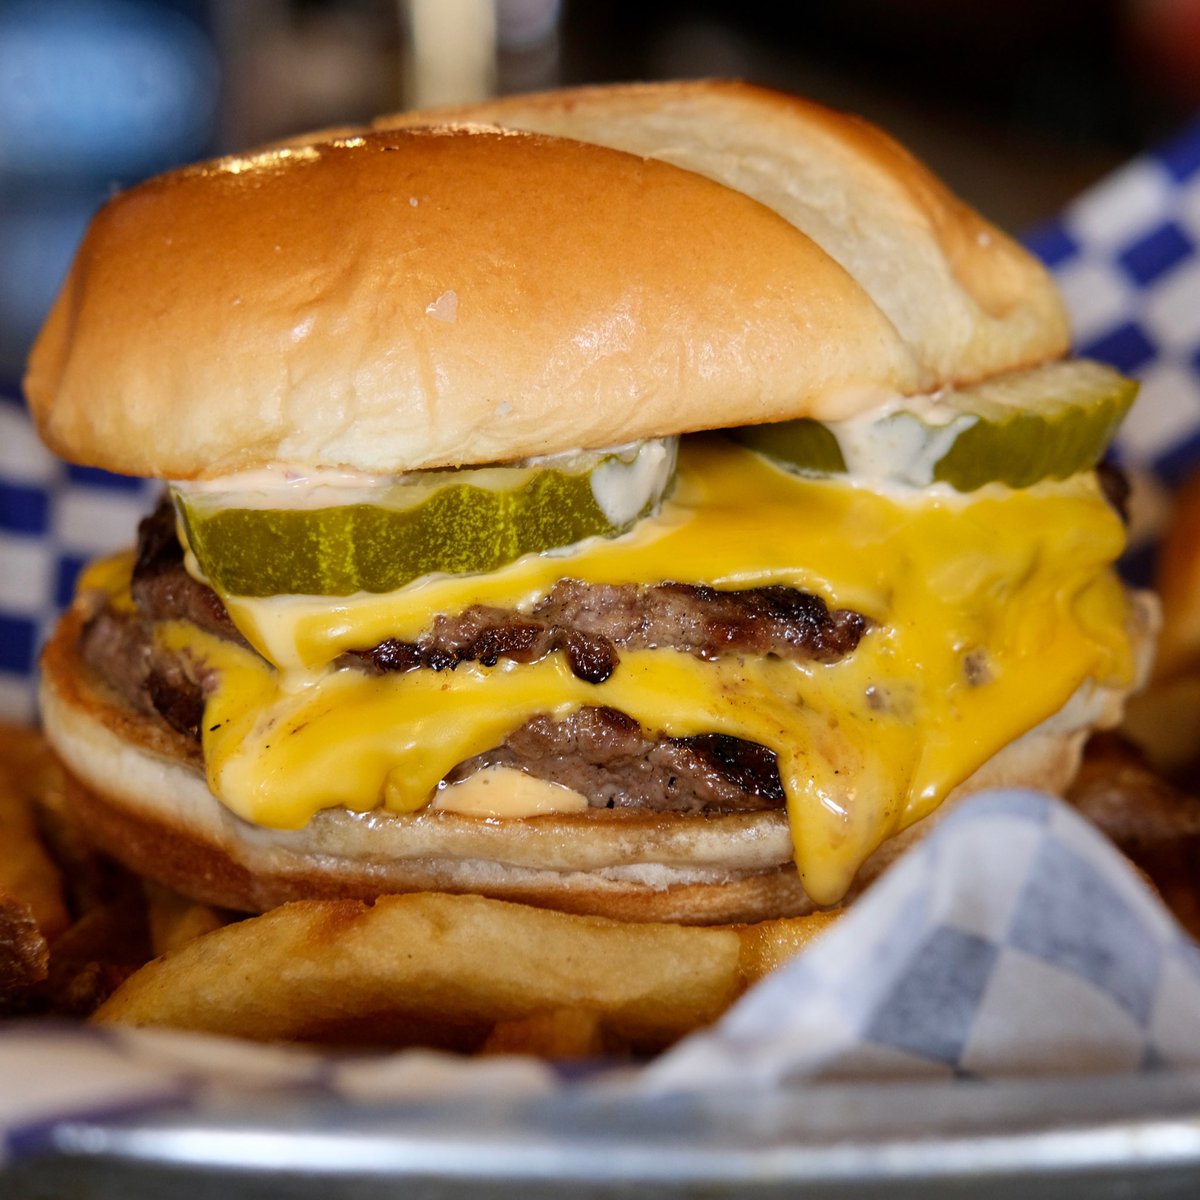 It’s Friday! This delicious Burger is YOURS. 🍔

Open daily at 11am. Pickup & Delivery available. Call for pickup: (773) 661-1573. View menu & delivery at beckschicago.com
 
#chicagobars #lincolnpark #lincolnparkchicago #chicagoeats #burger #cheeseburger #chicagoburgers